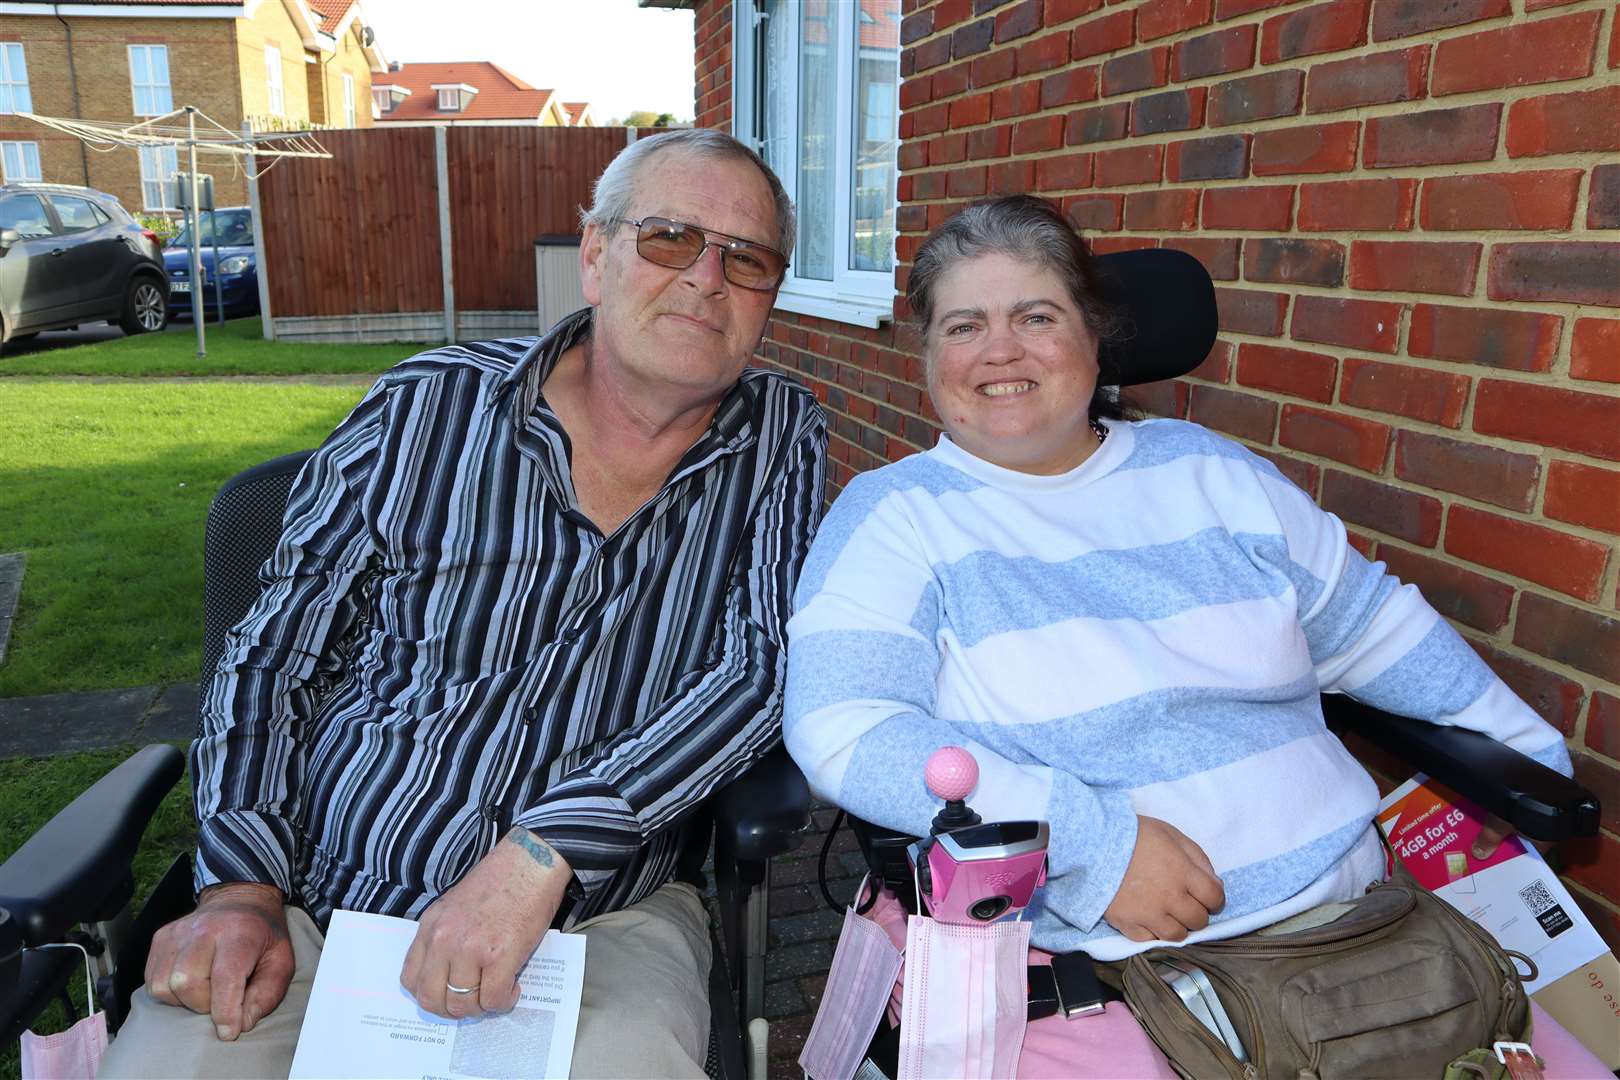 Keith Whitman, 61, and his wife Amanda, 41, met and married at the Little Oyster residential home on The Leas at Minster, Sheppey